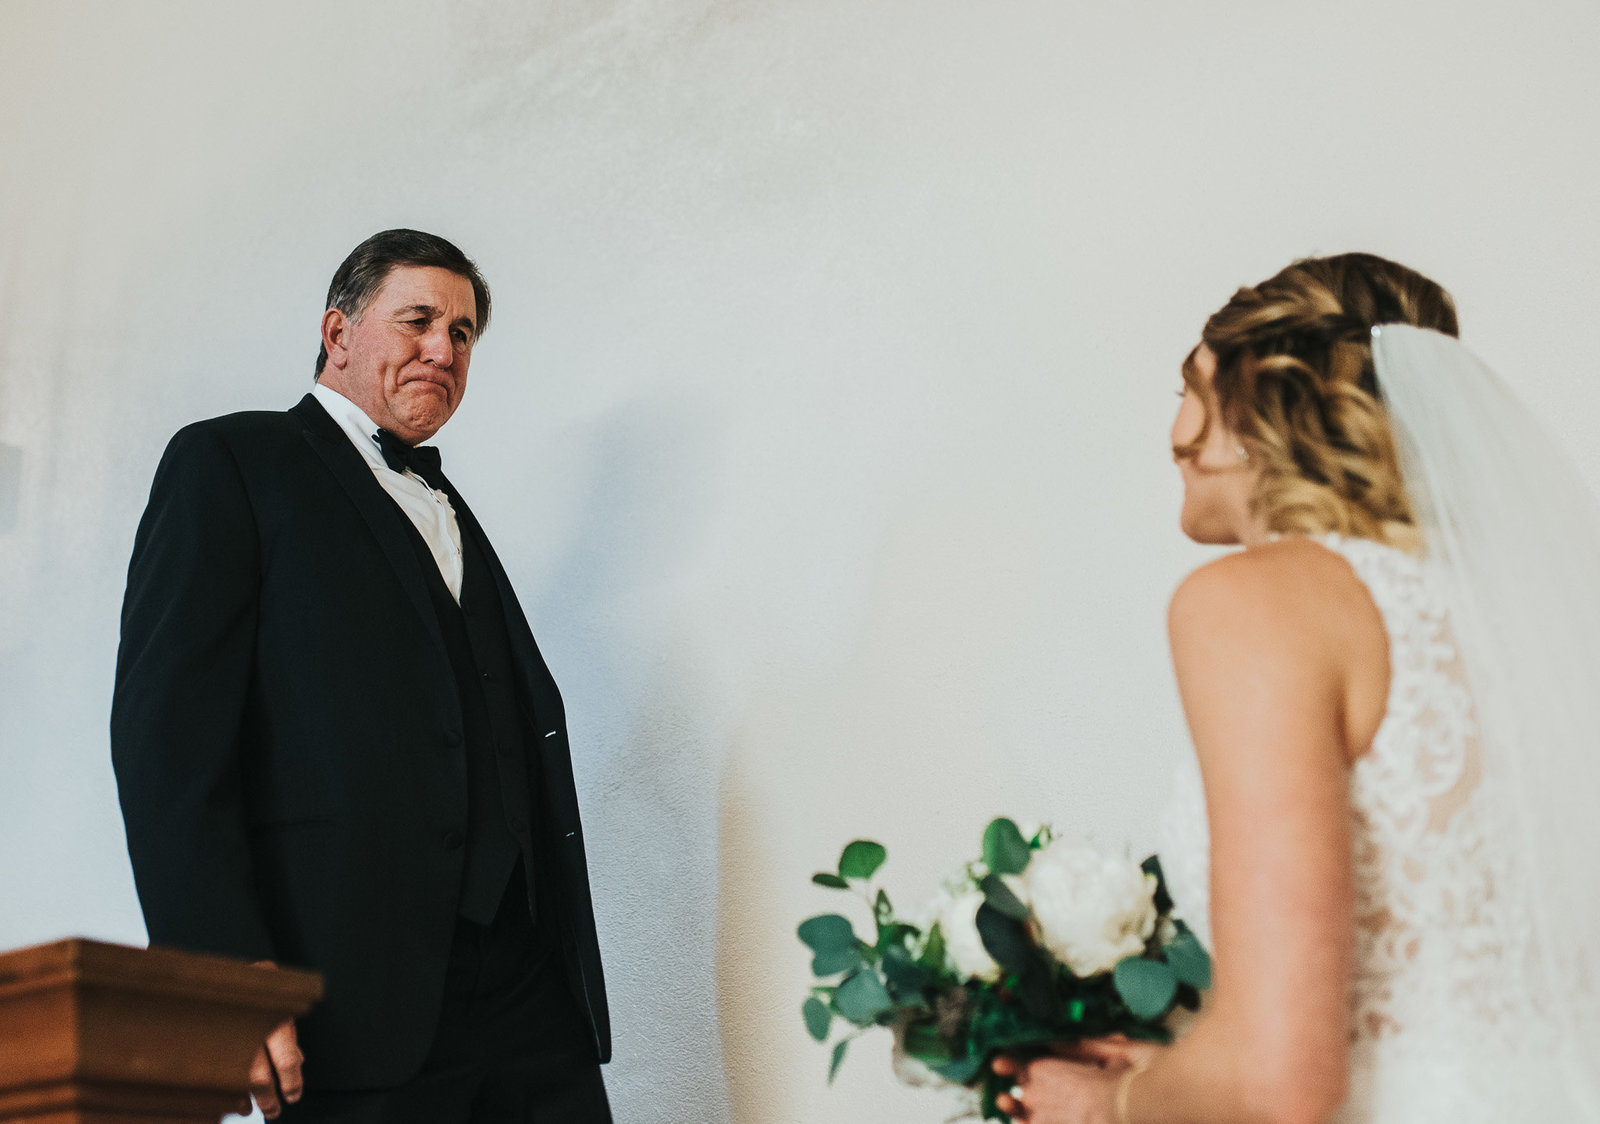 Photo of Dad seeing his girl get married. Touching candid photo in Denver Colorado.